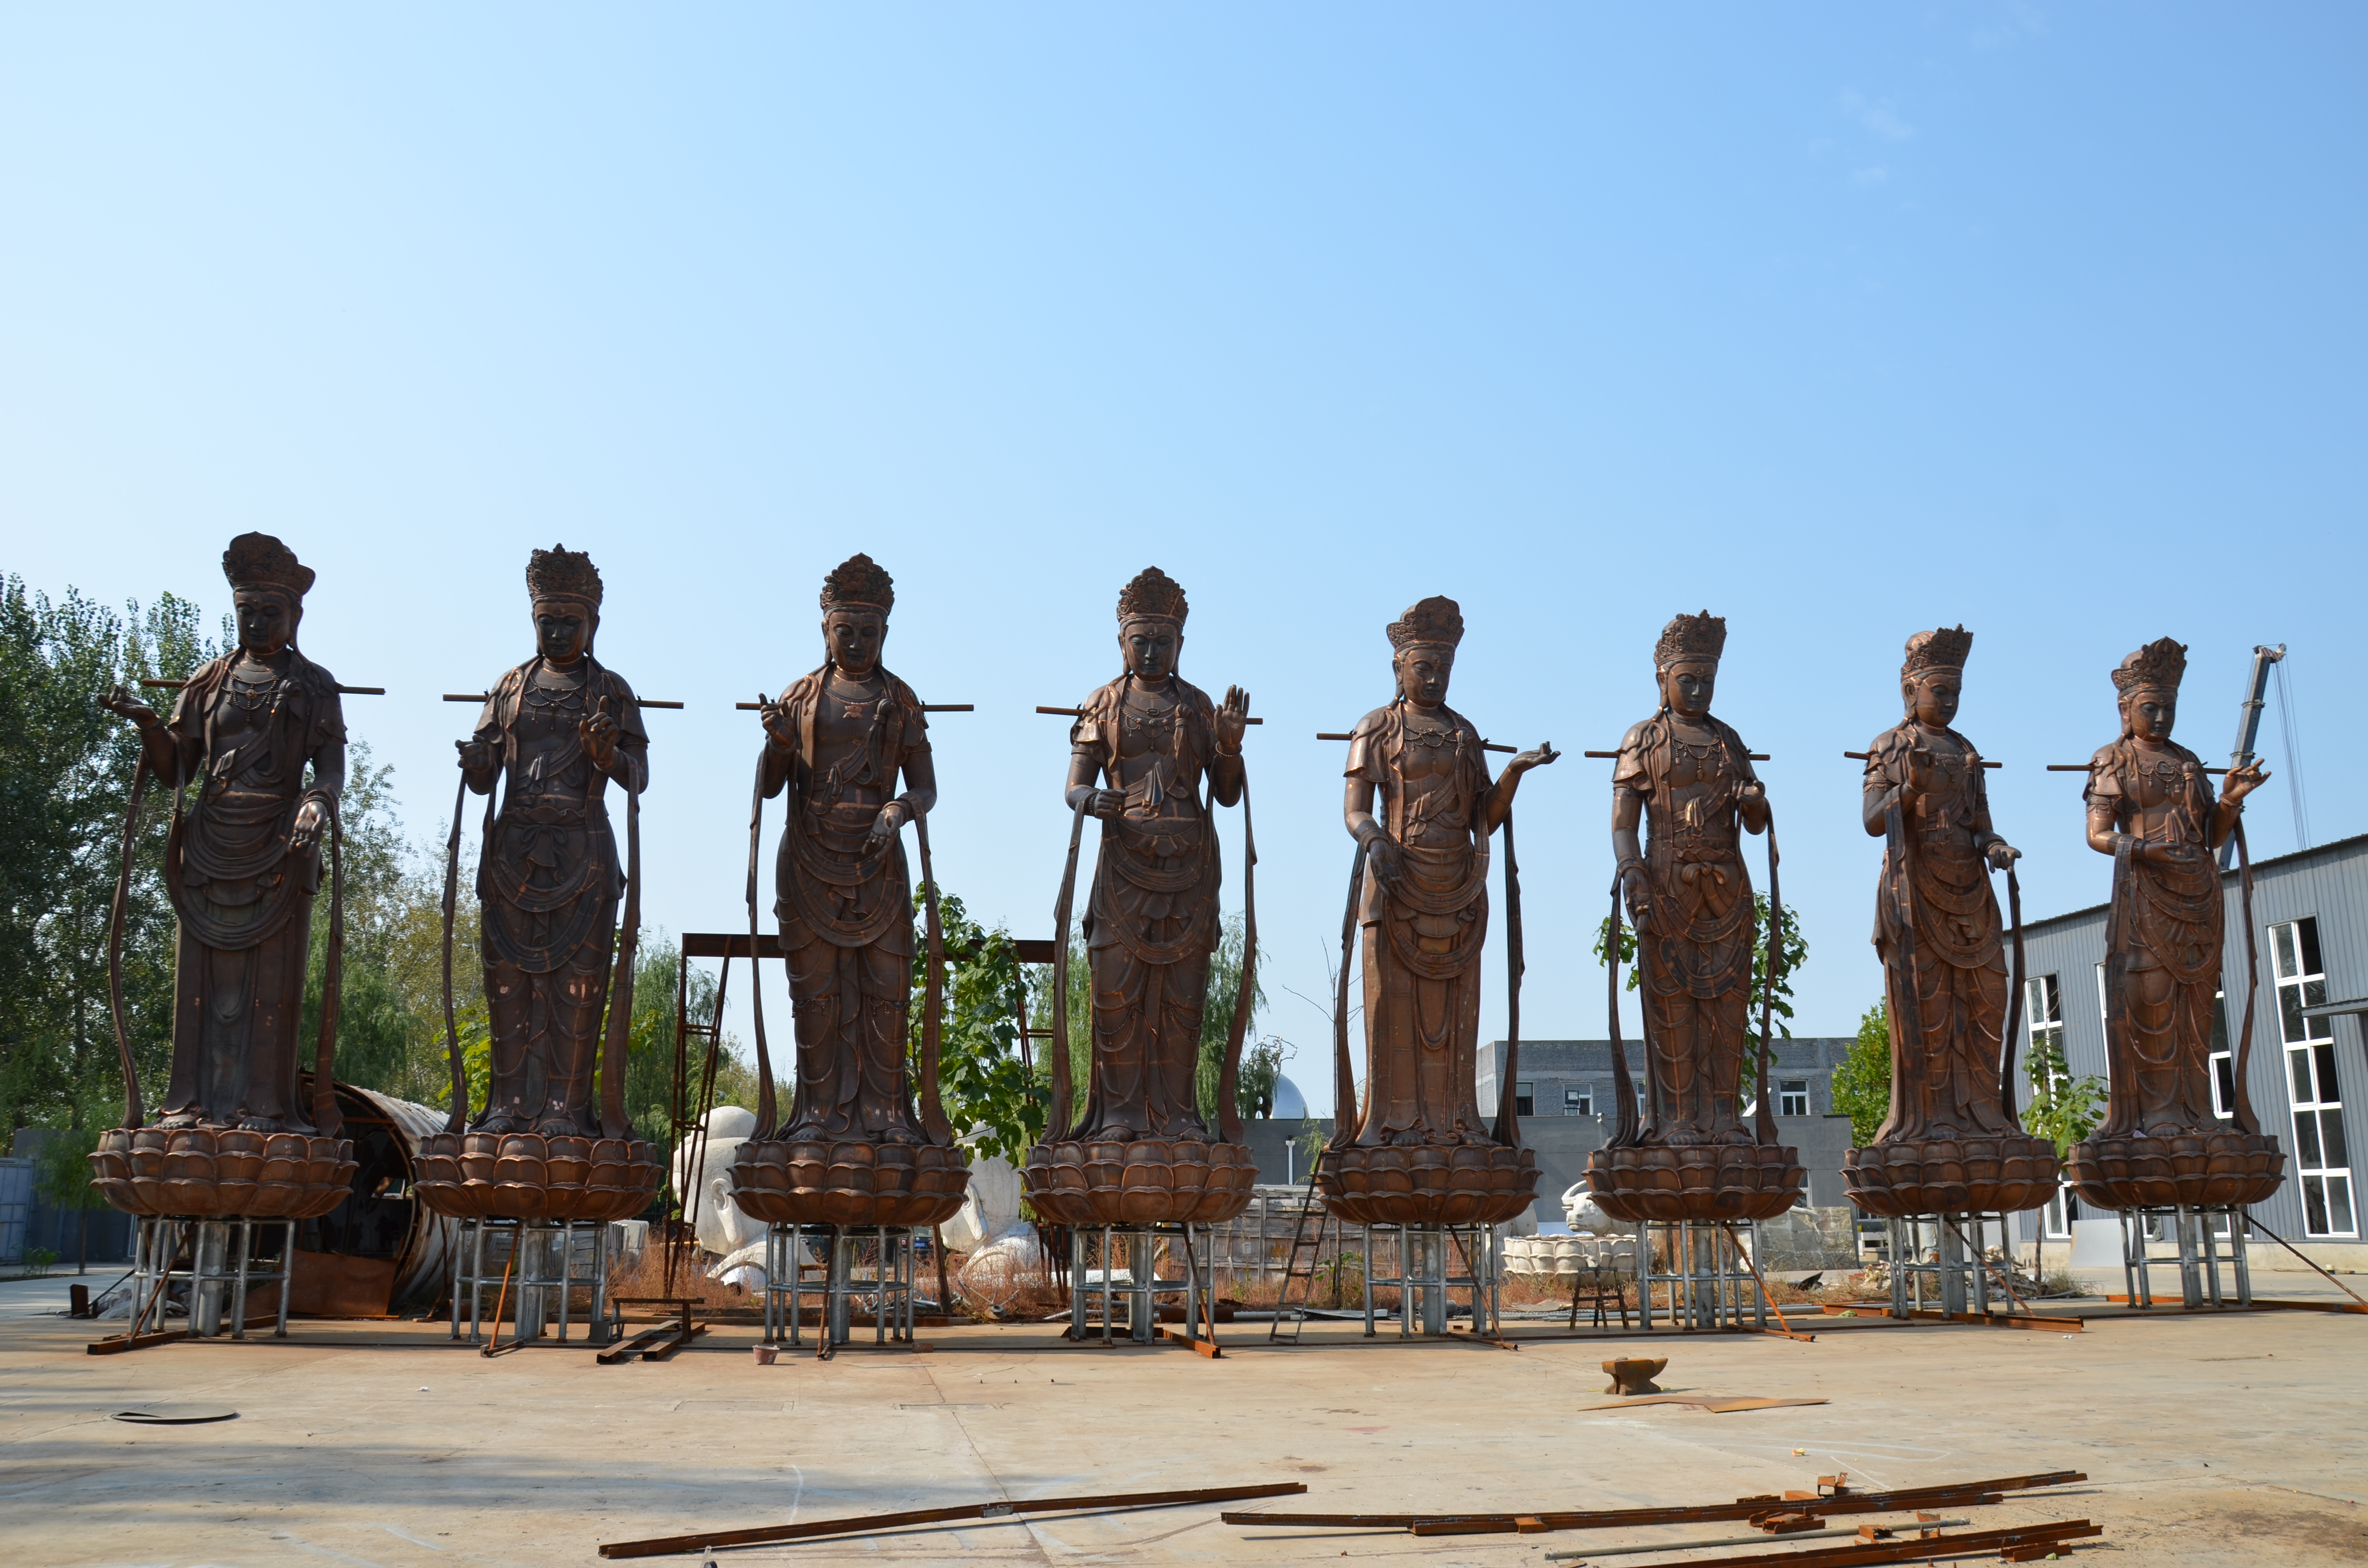 8meters bronze Guanyin Buddha statue standing in foundry